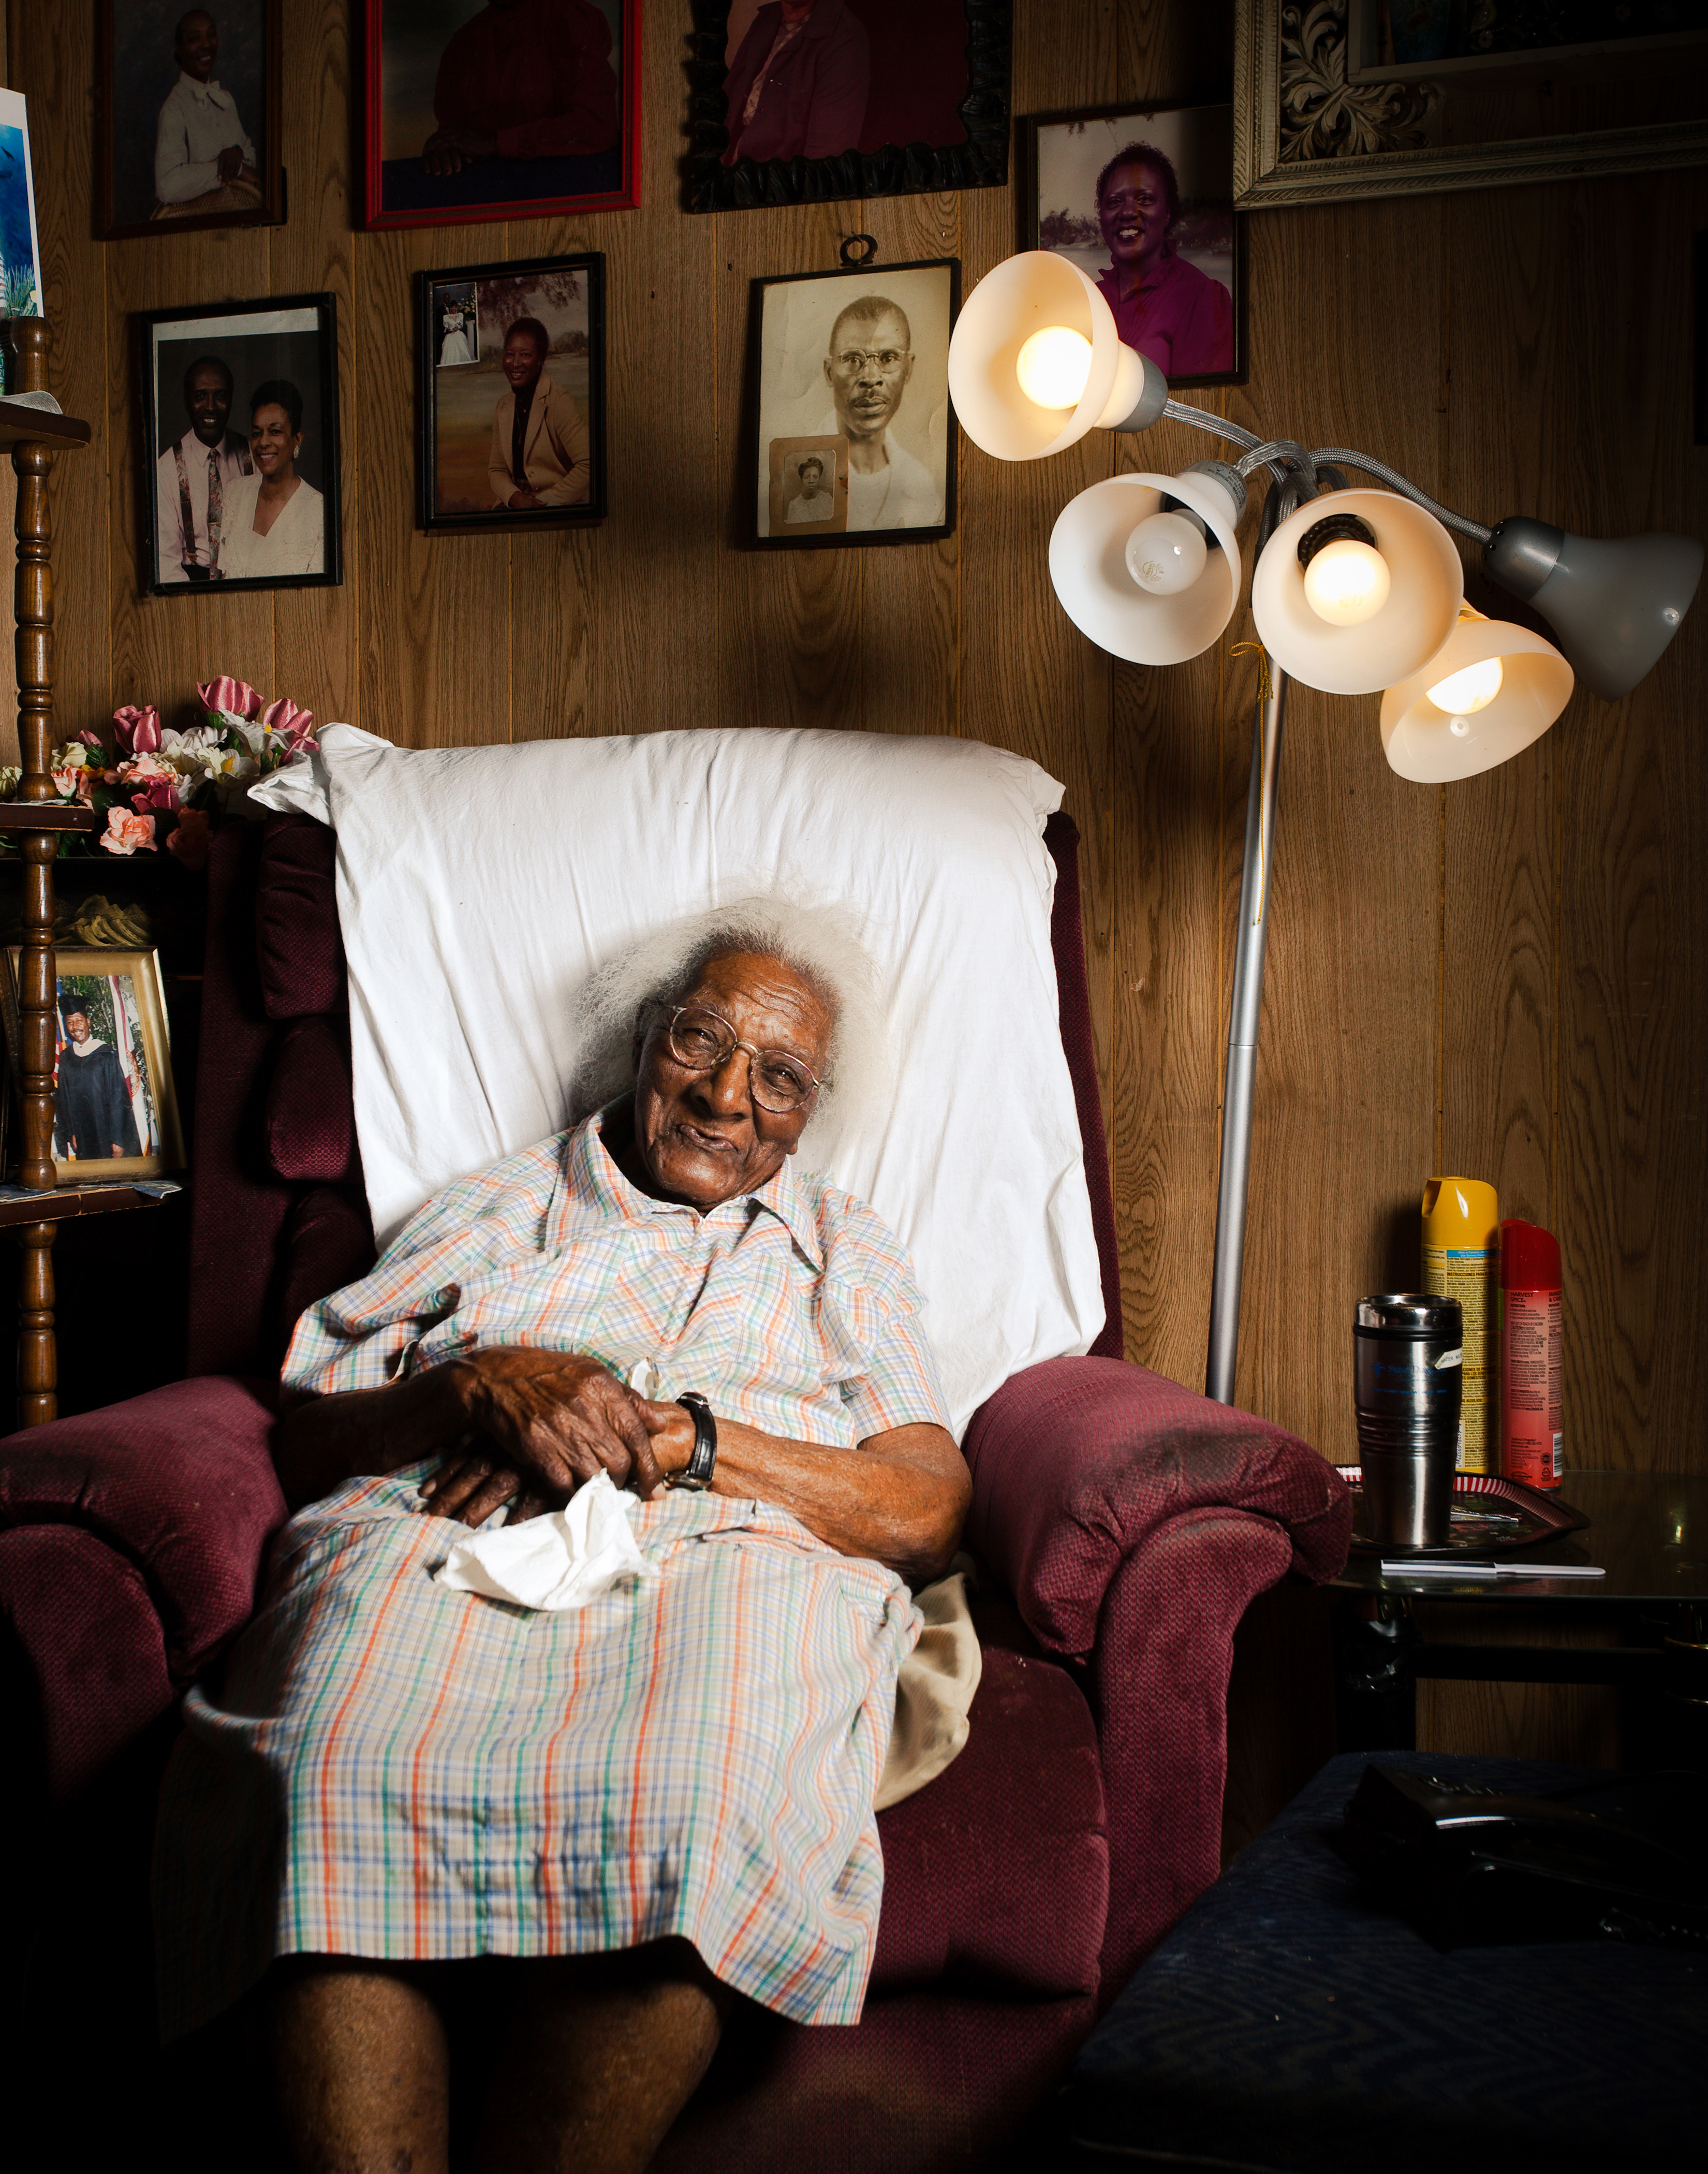 Born September 8, 1900, Blanche Arrington Cobb is photographed celebrating her 110th birthday in 2010. Now 113, she has lived with her daughter on the Northside in Jacksonville, FL.